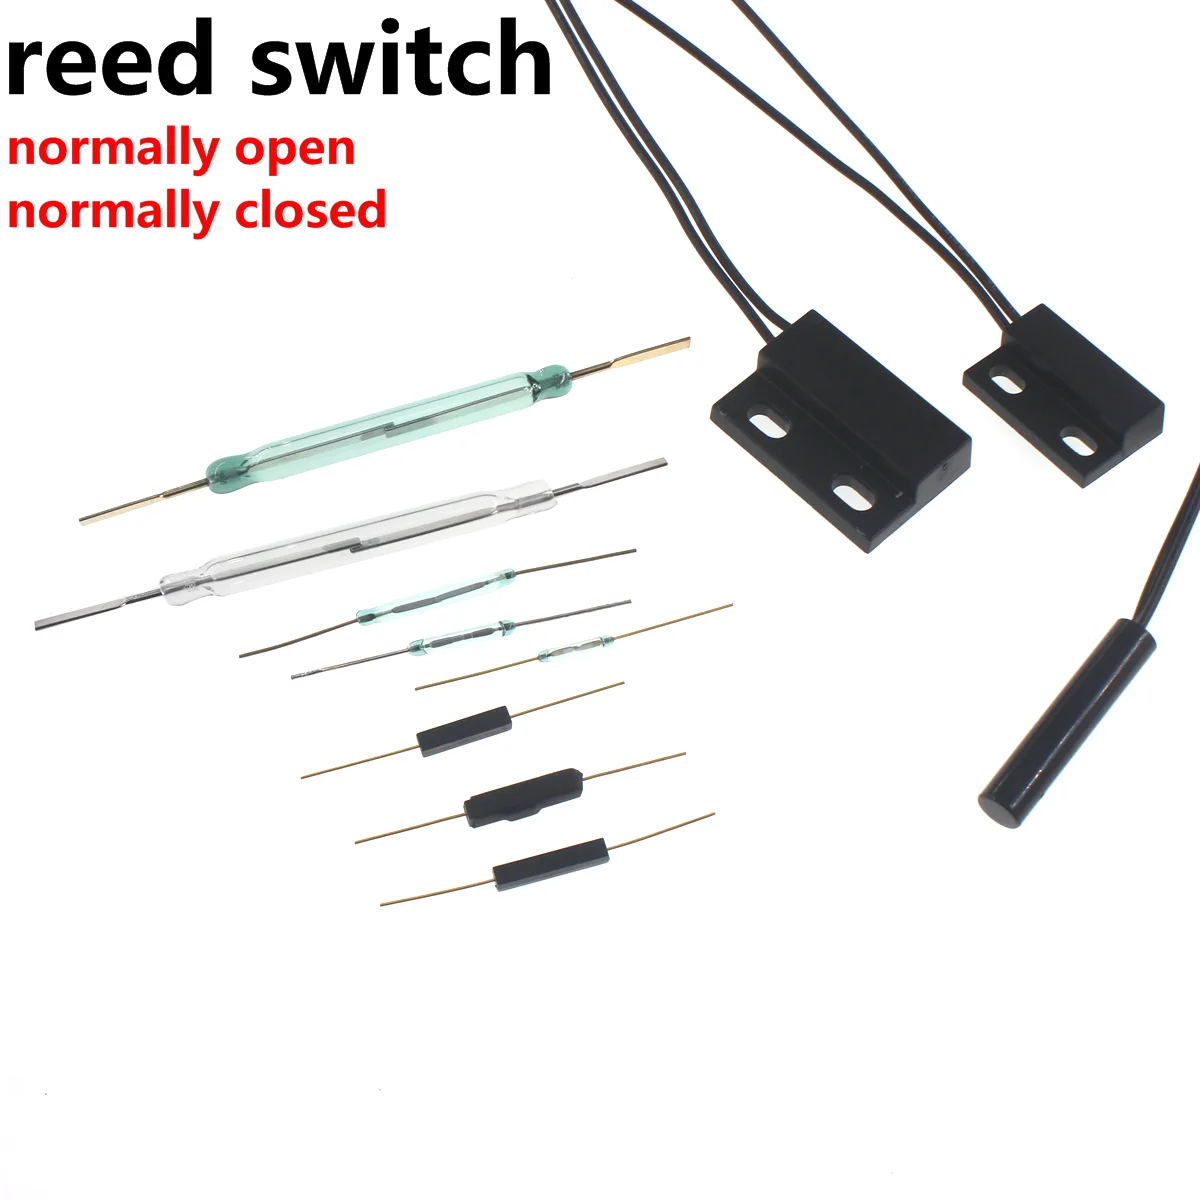 10/5PCS GPS-23  Normally Open Proximity Switch Magnetic Control Reed Switch Plastic GPS-11 2X14 5X50 GPS-01 GPS-30 GPS-14 ps 3150 reed switch sensor ps 3150 normally open no proximity magnetic door window contacts 30cm wire inductance distance